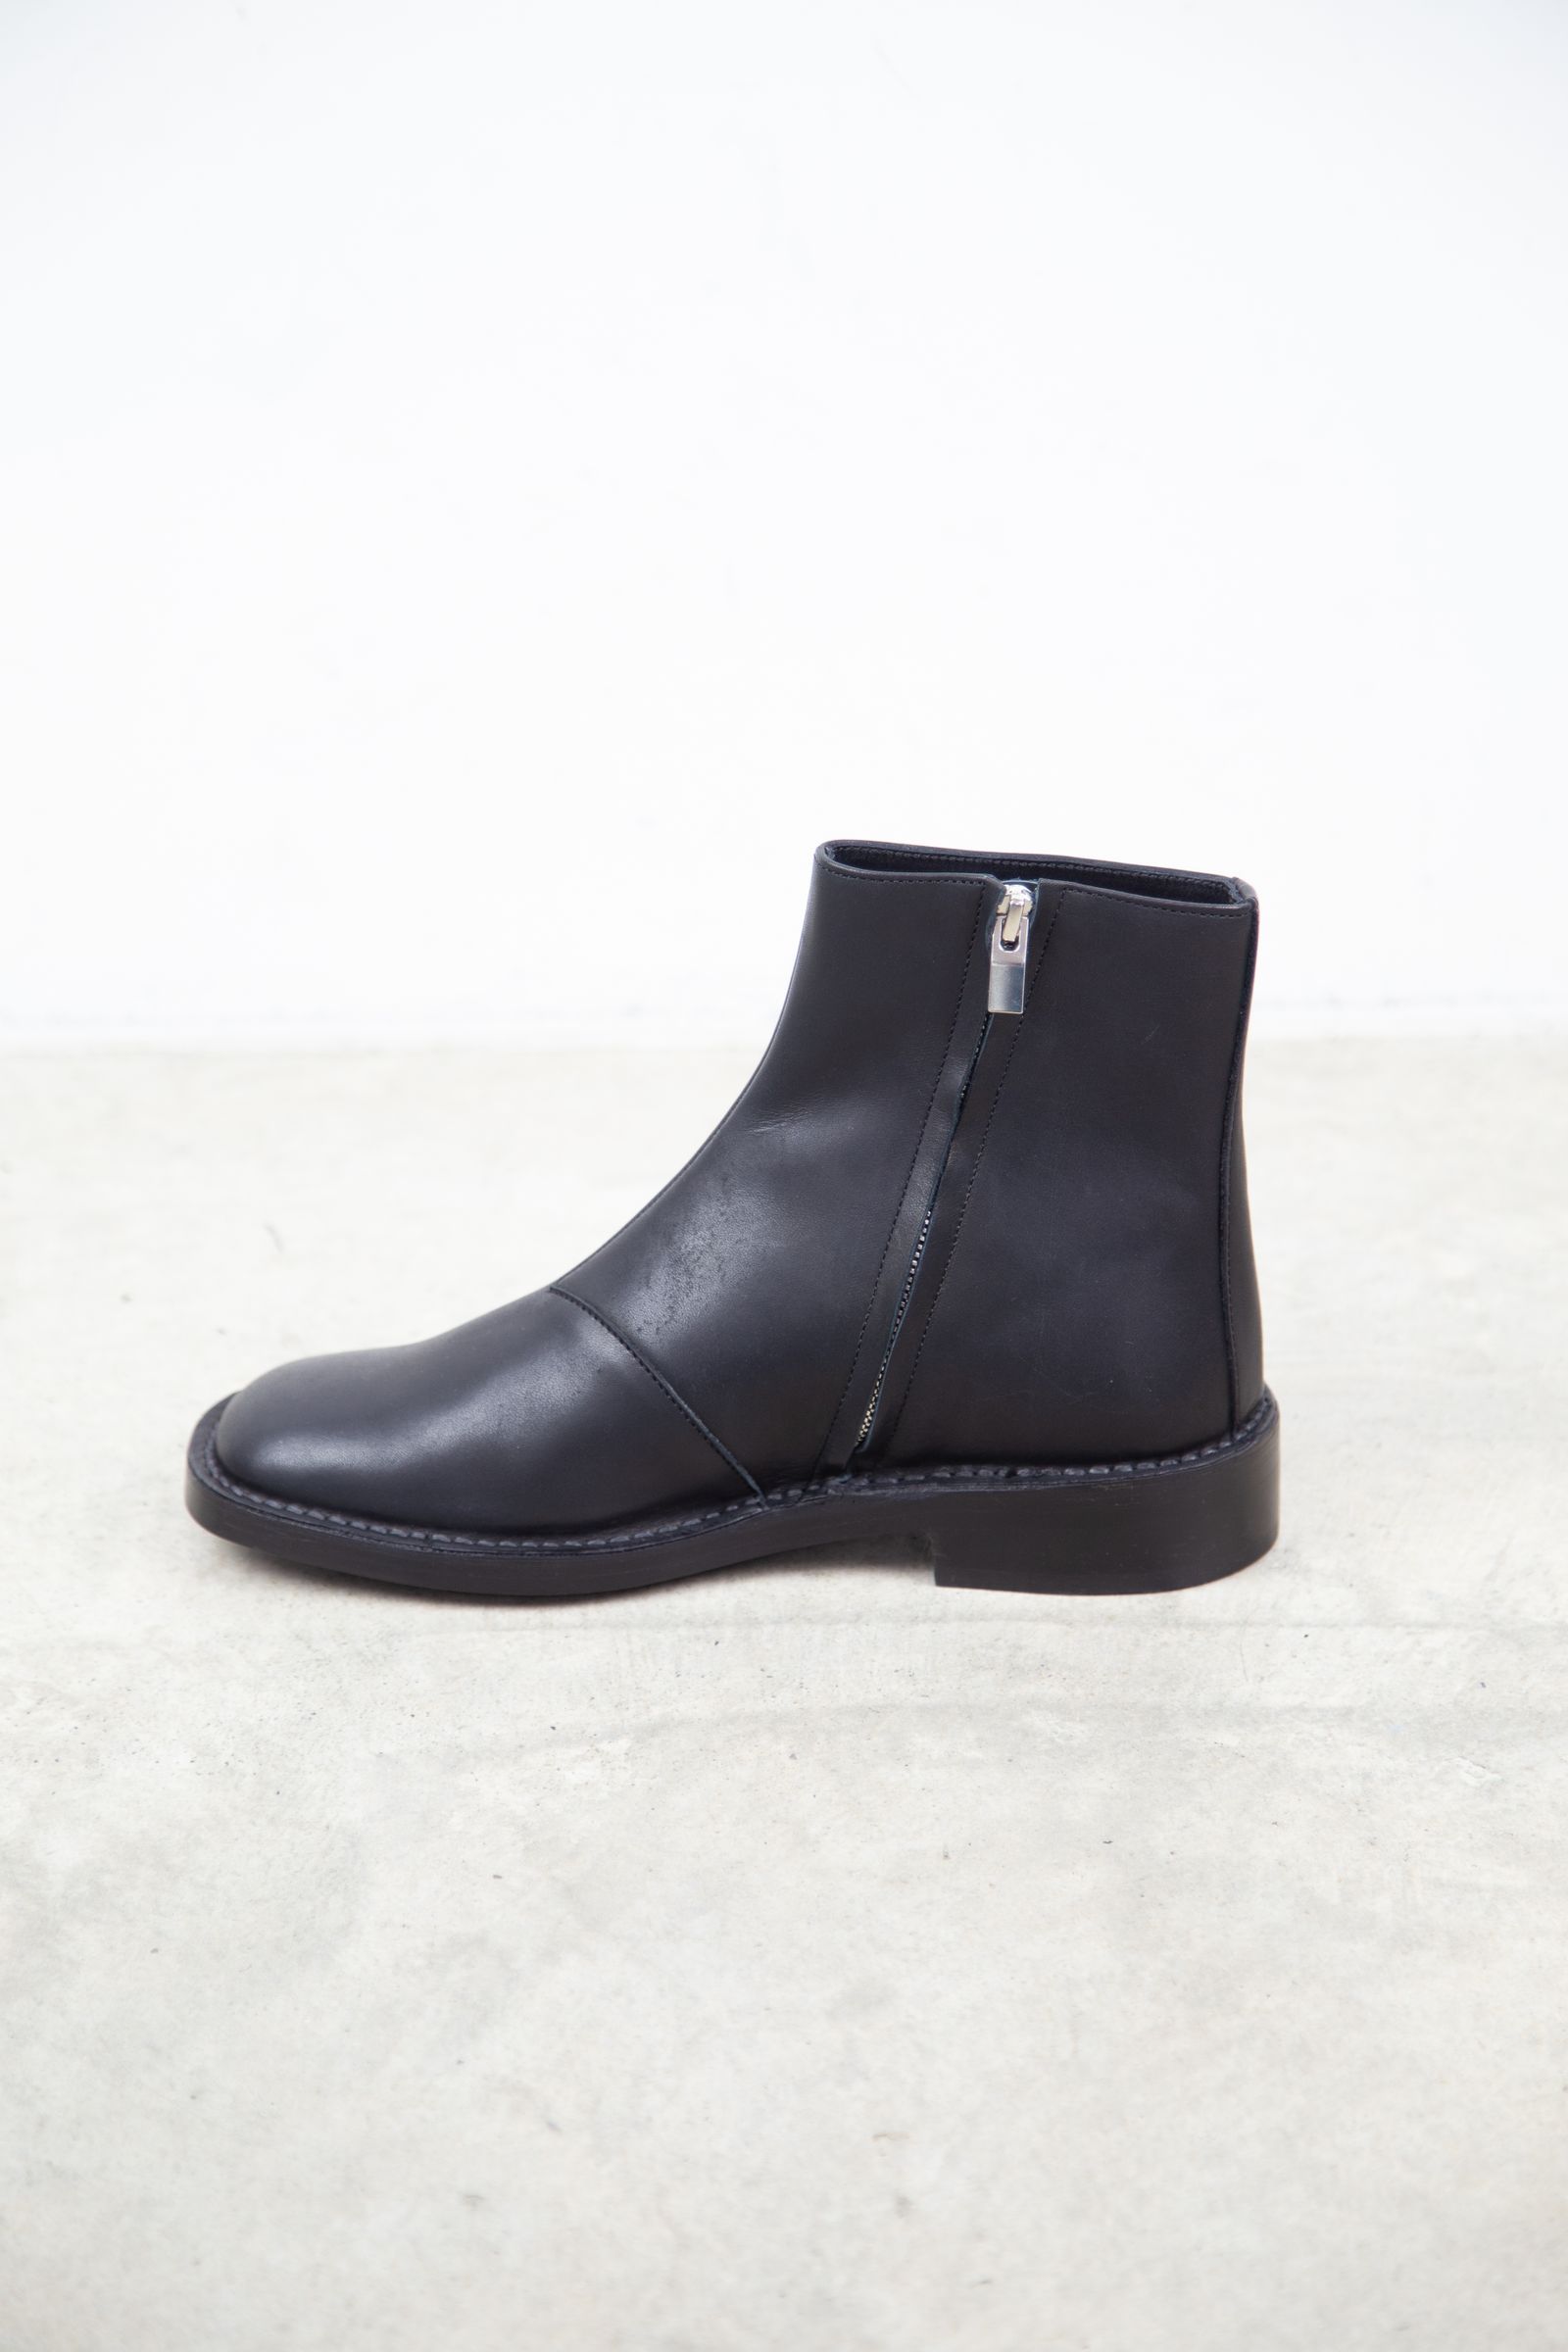 ATTACHMENT - COW LEATHER SIDE ZIP BOOTS / ブラック | Tempt